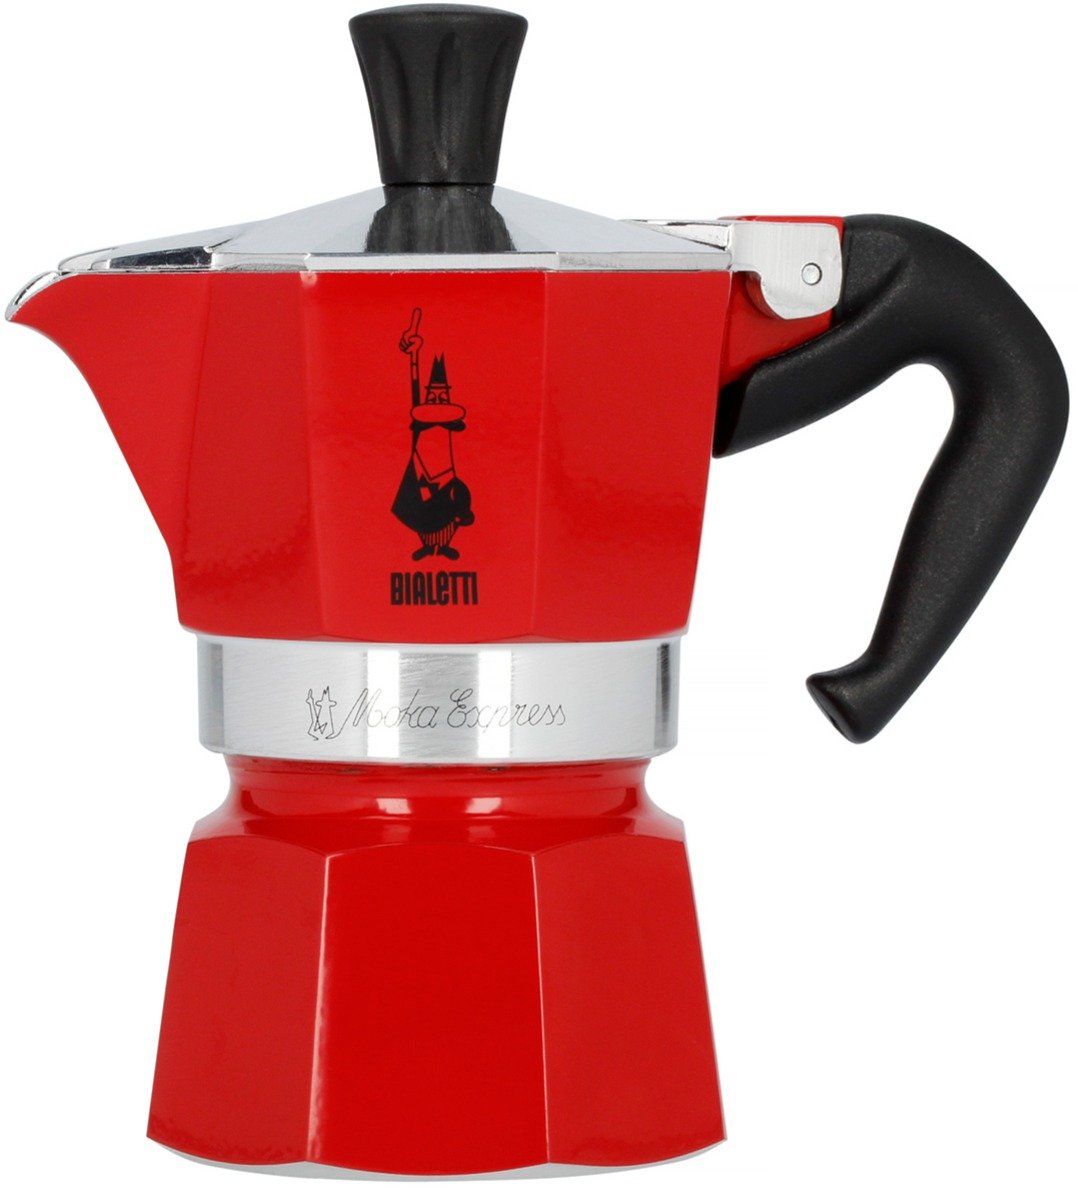 BIALETTI REPLACEMENT PLASTIC HANDLE 3 4 CUP MOKA EXPRESS ESPRESSO COFFEE MAKER 